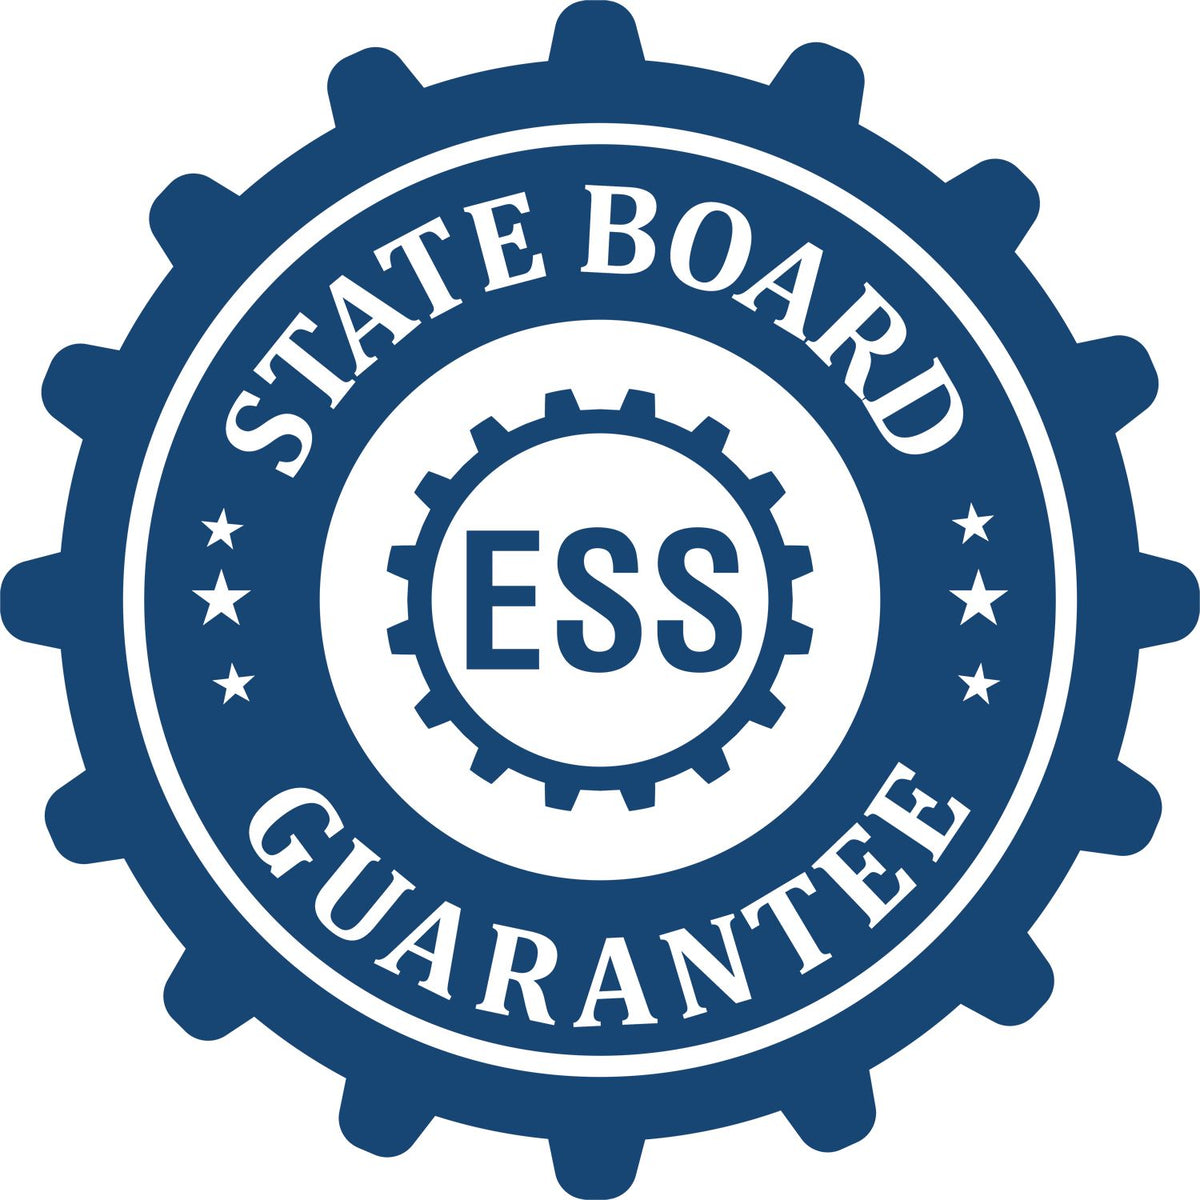 An emblem in a gear shape illustrating a state board guarantee for the Hybrid Massachusetts Engineer Seal